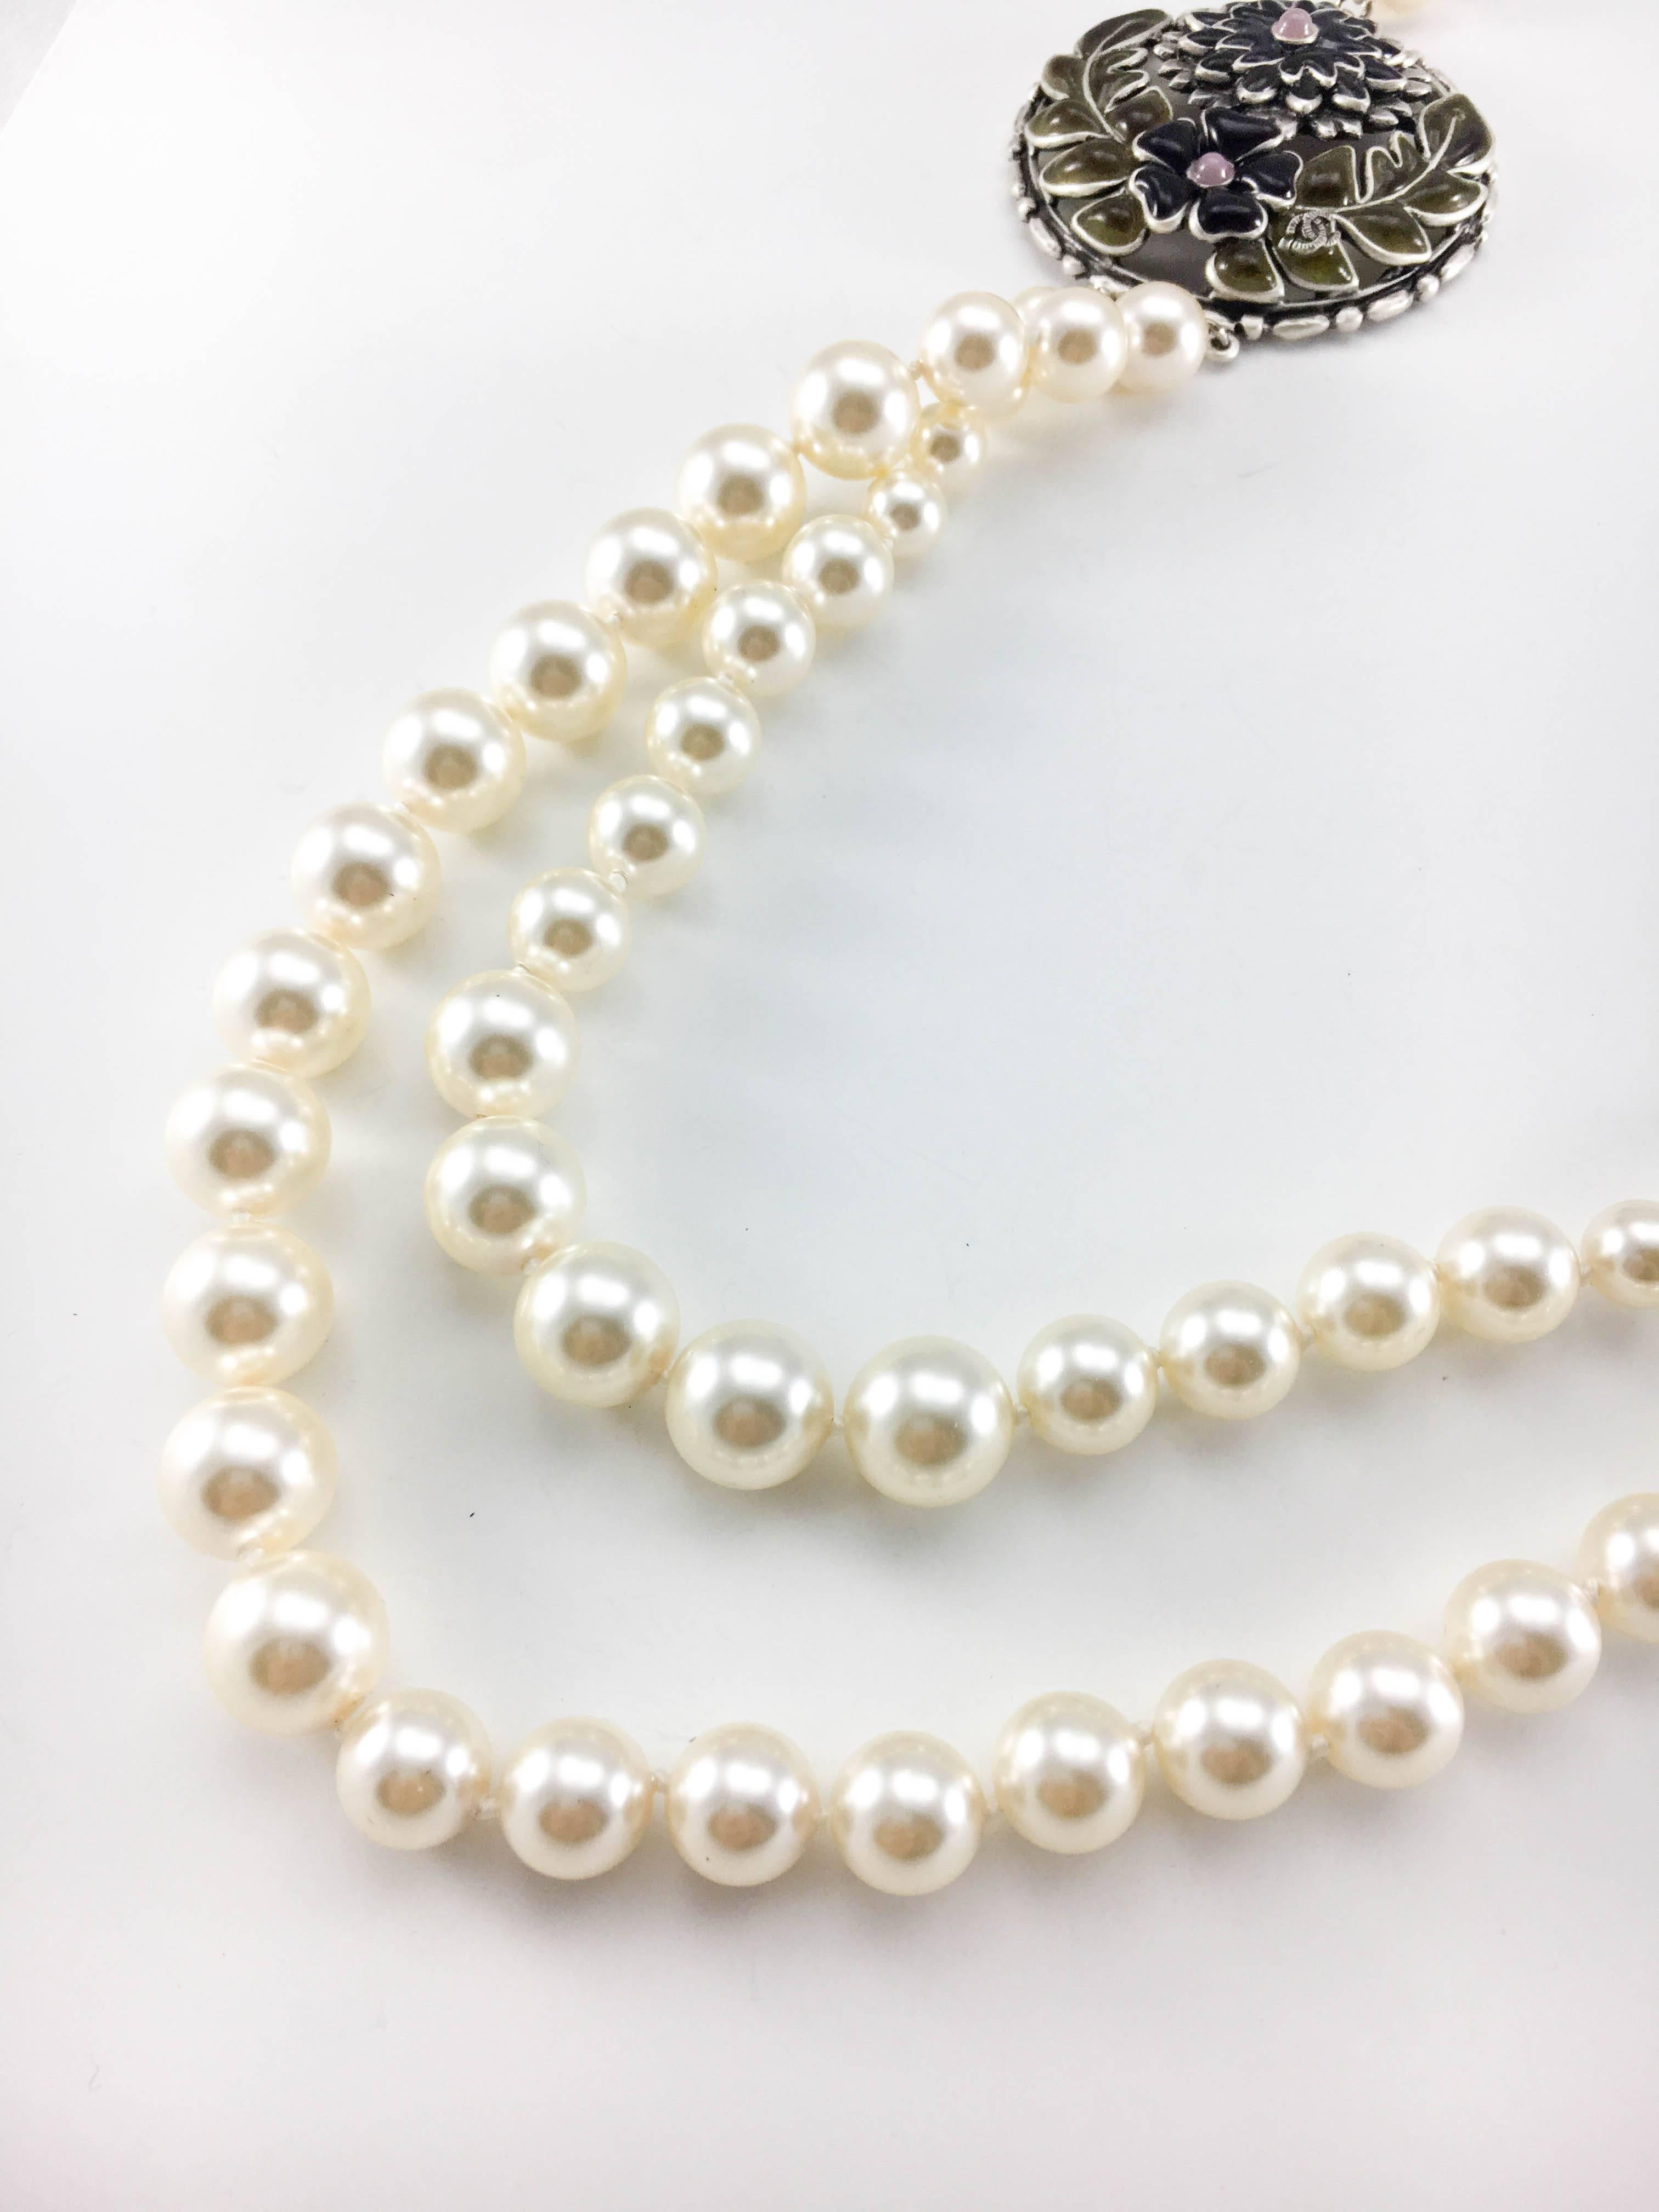 2015 Chanel Long Faux Pearl and Gripoix Sautoir Necklace 2